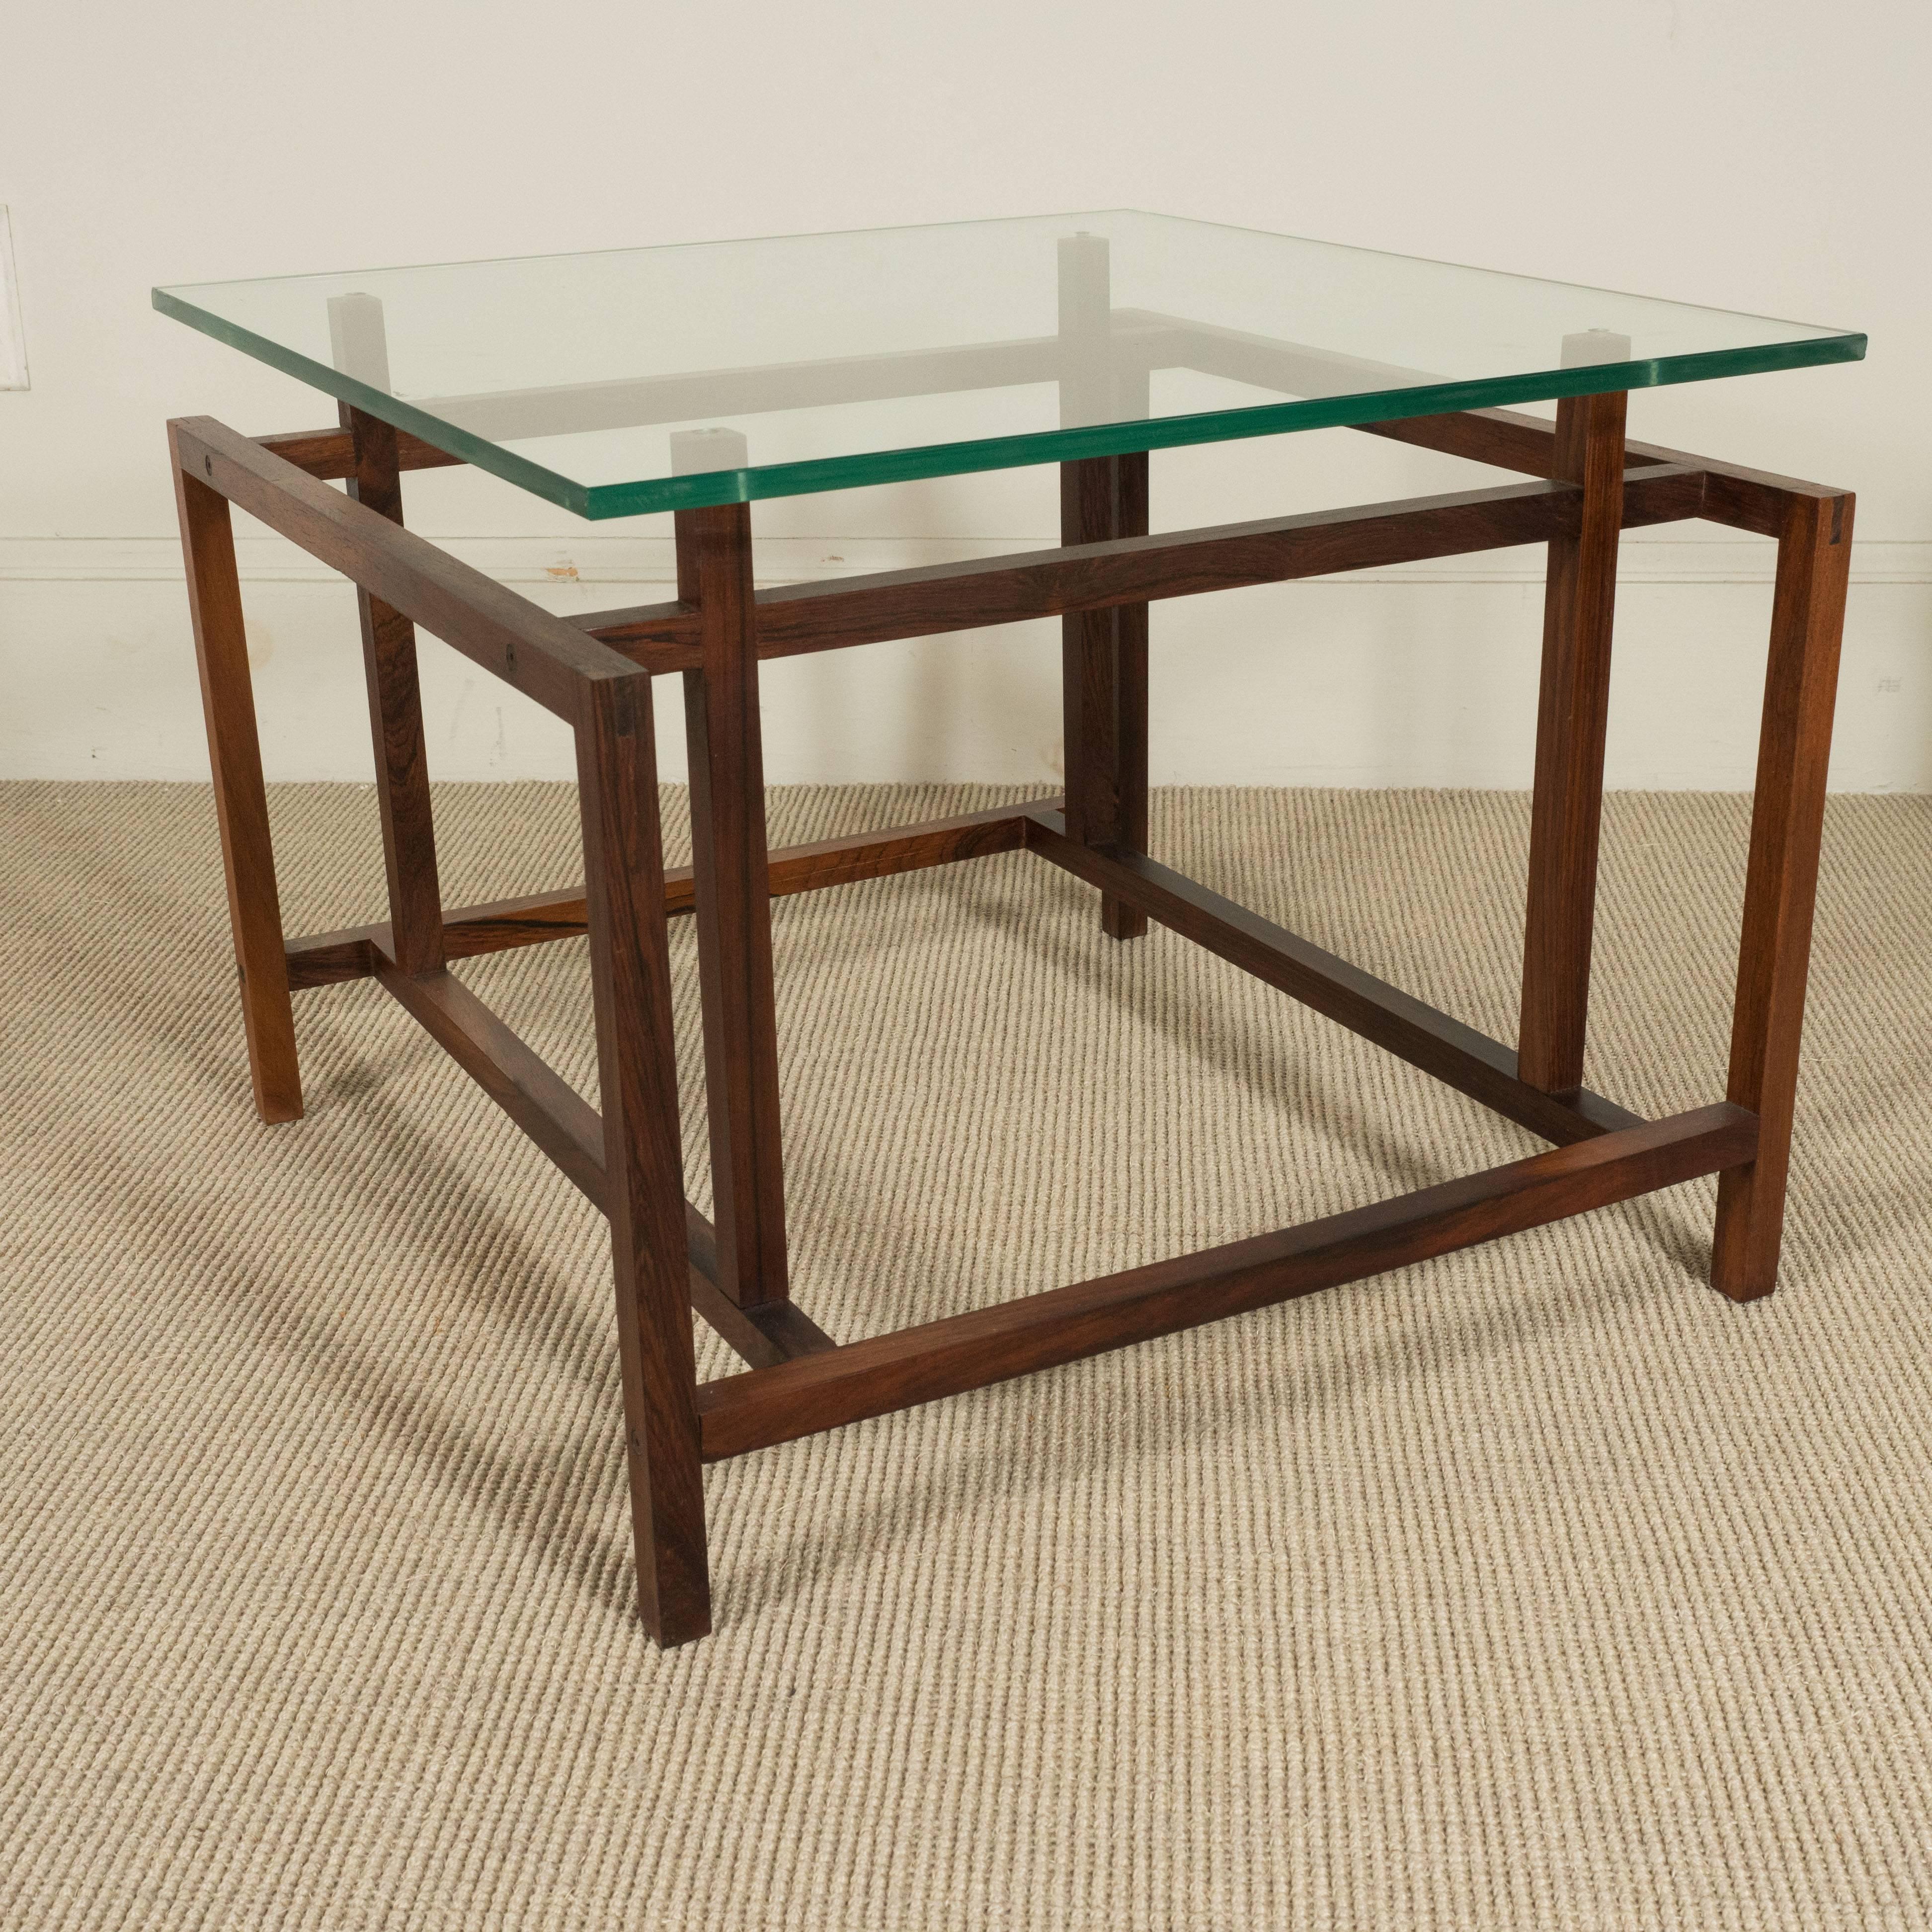 Henning Norgaard rosewood and glass top table.